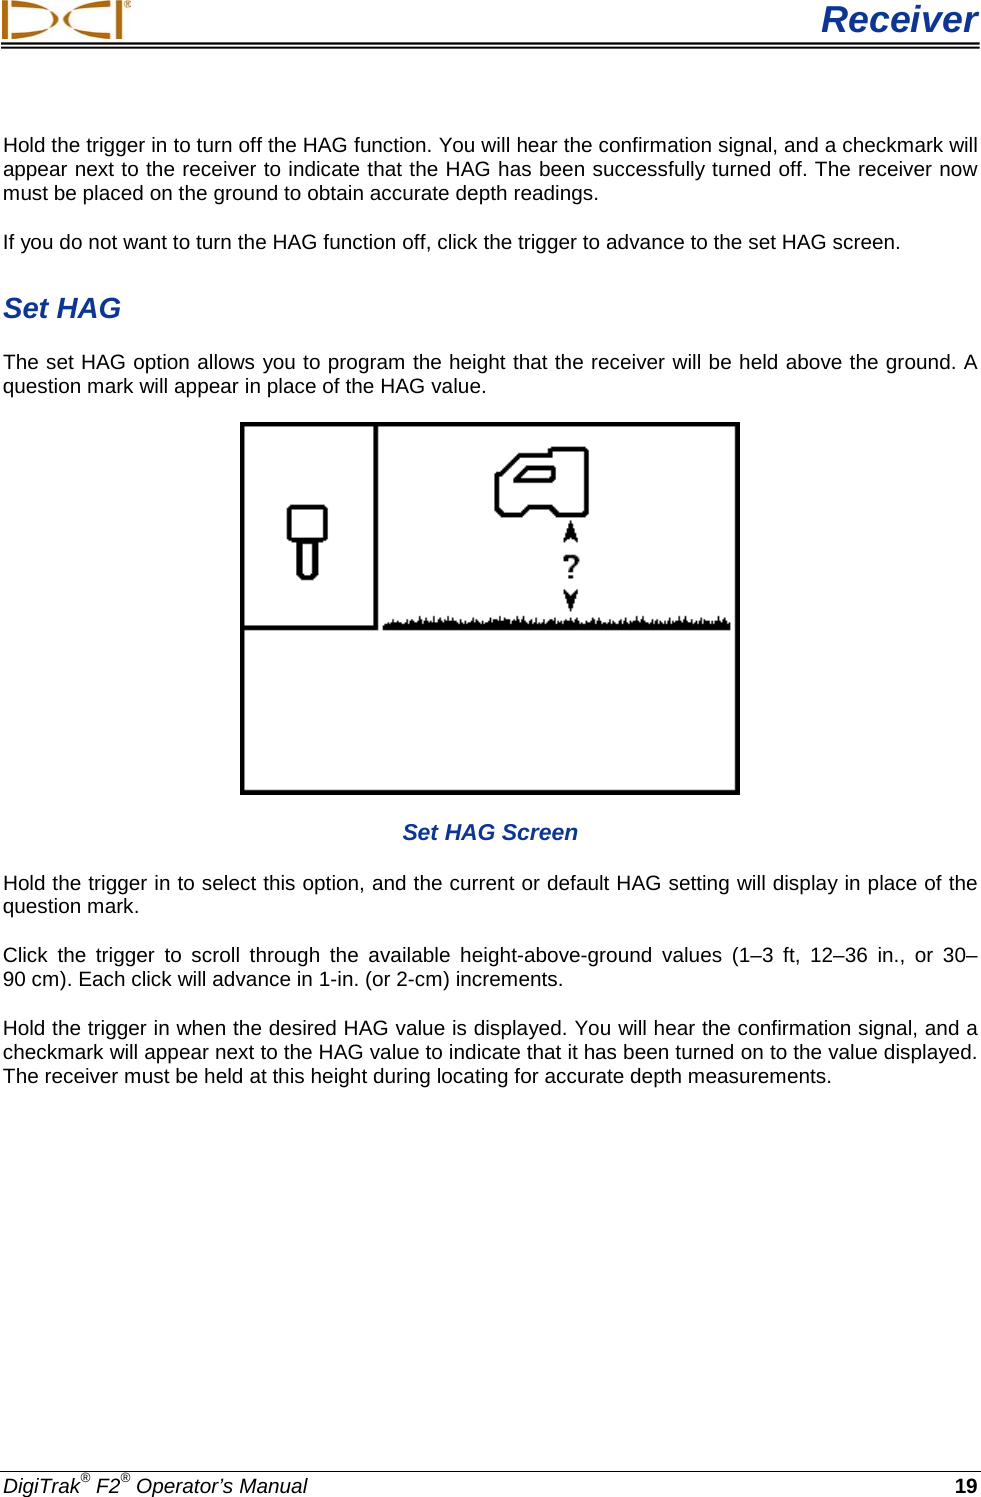  Receiver DigiTrak® F2® Operator’s Manual 19 Hold the trigger in to turn off the HAG function. You will hear the confirmation signal, and a checkmark will appear next to the receiver to indicate that the HAG has been successfully turned off. The receiver now must be placed on the ground to obtain accurate depth readings.  If you do not want to turn the HAG function off, click the trigger to advance to the set HAG screen. Set HAG The set HAG option allows you to program the height that the receiver will be held above the ground. A question mark will appear in place of the HAG value.  Set HAG Screen Hold the trigger in to select this option, and the current or default HAG setting will display in place of the question mark.  Click the trigger to scroll through the available height-above-ground values (1–3 ft, 12–36 in., or 30–90 cm). Each click will advance in 1-in. (or 2-cm) increments.  Hold the trigger in when the desired HAG value is displayed. You will hear the confirmation signal, and a checkmark will appear next to the HAG value to indicate that it has been turned on to the value displayed. The receiver must be held at this height during locating for accurate depth measurements.  